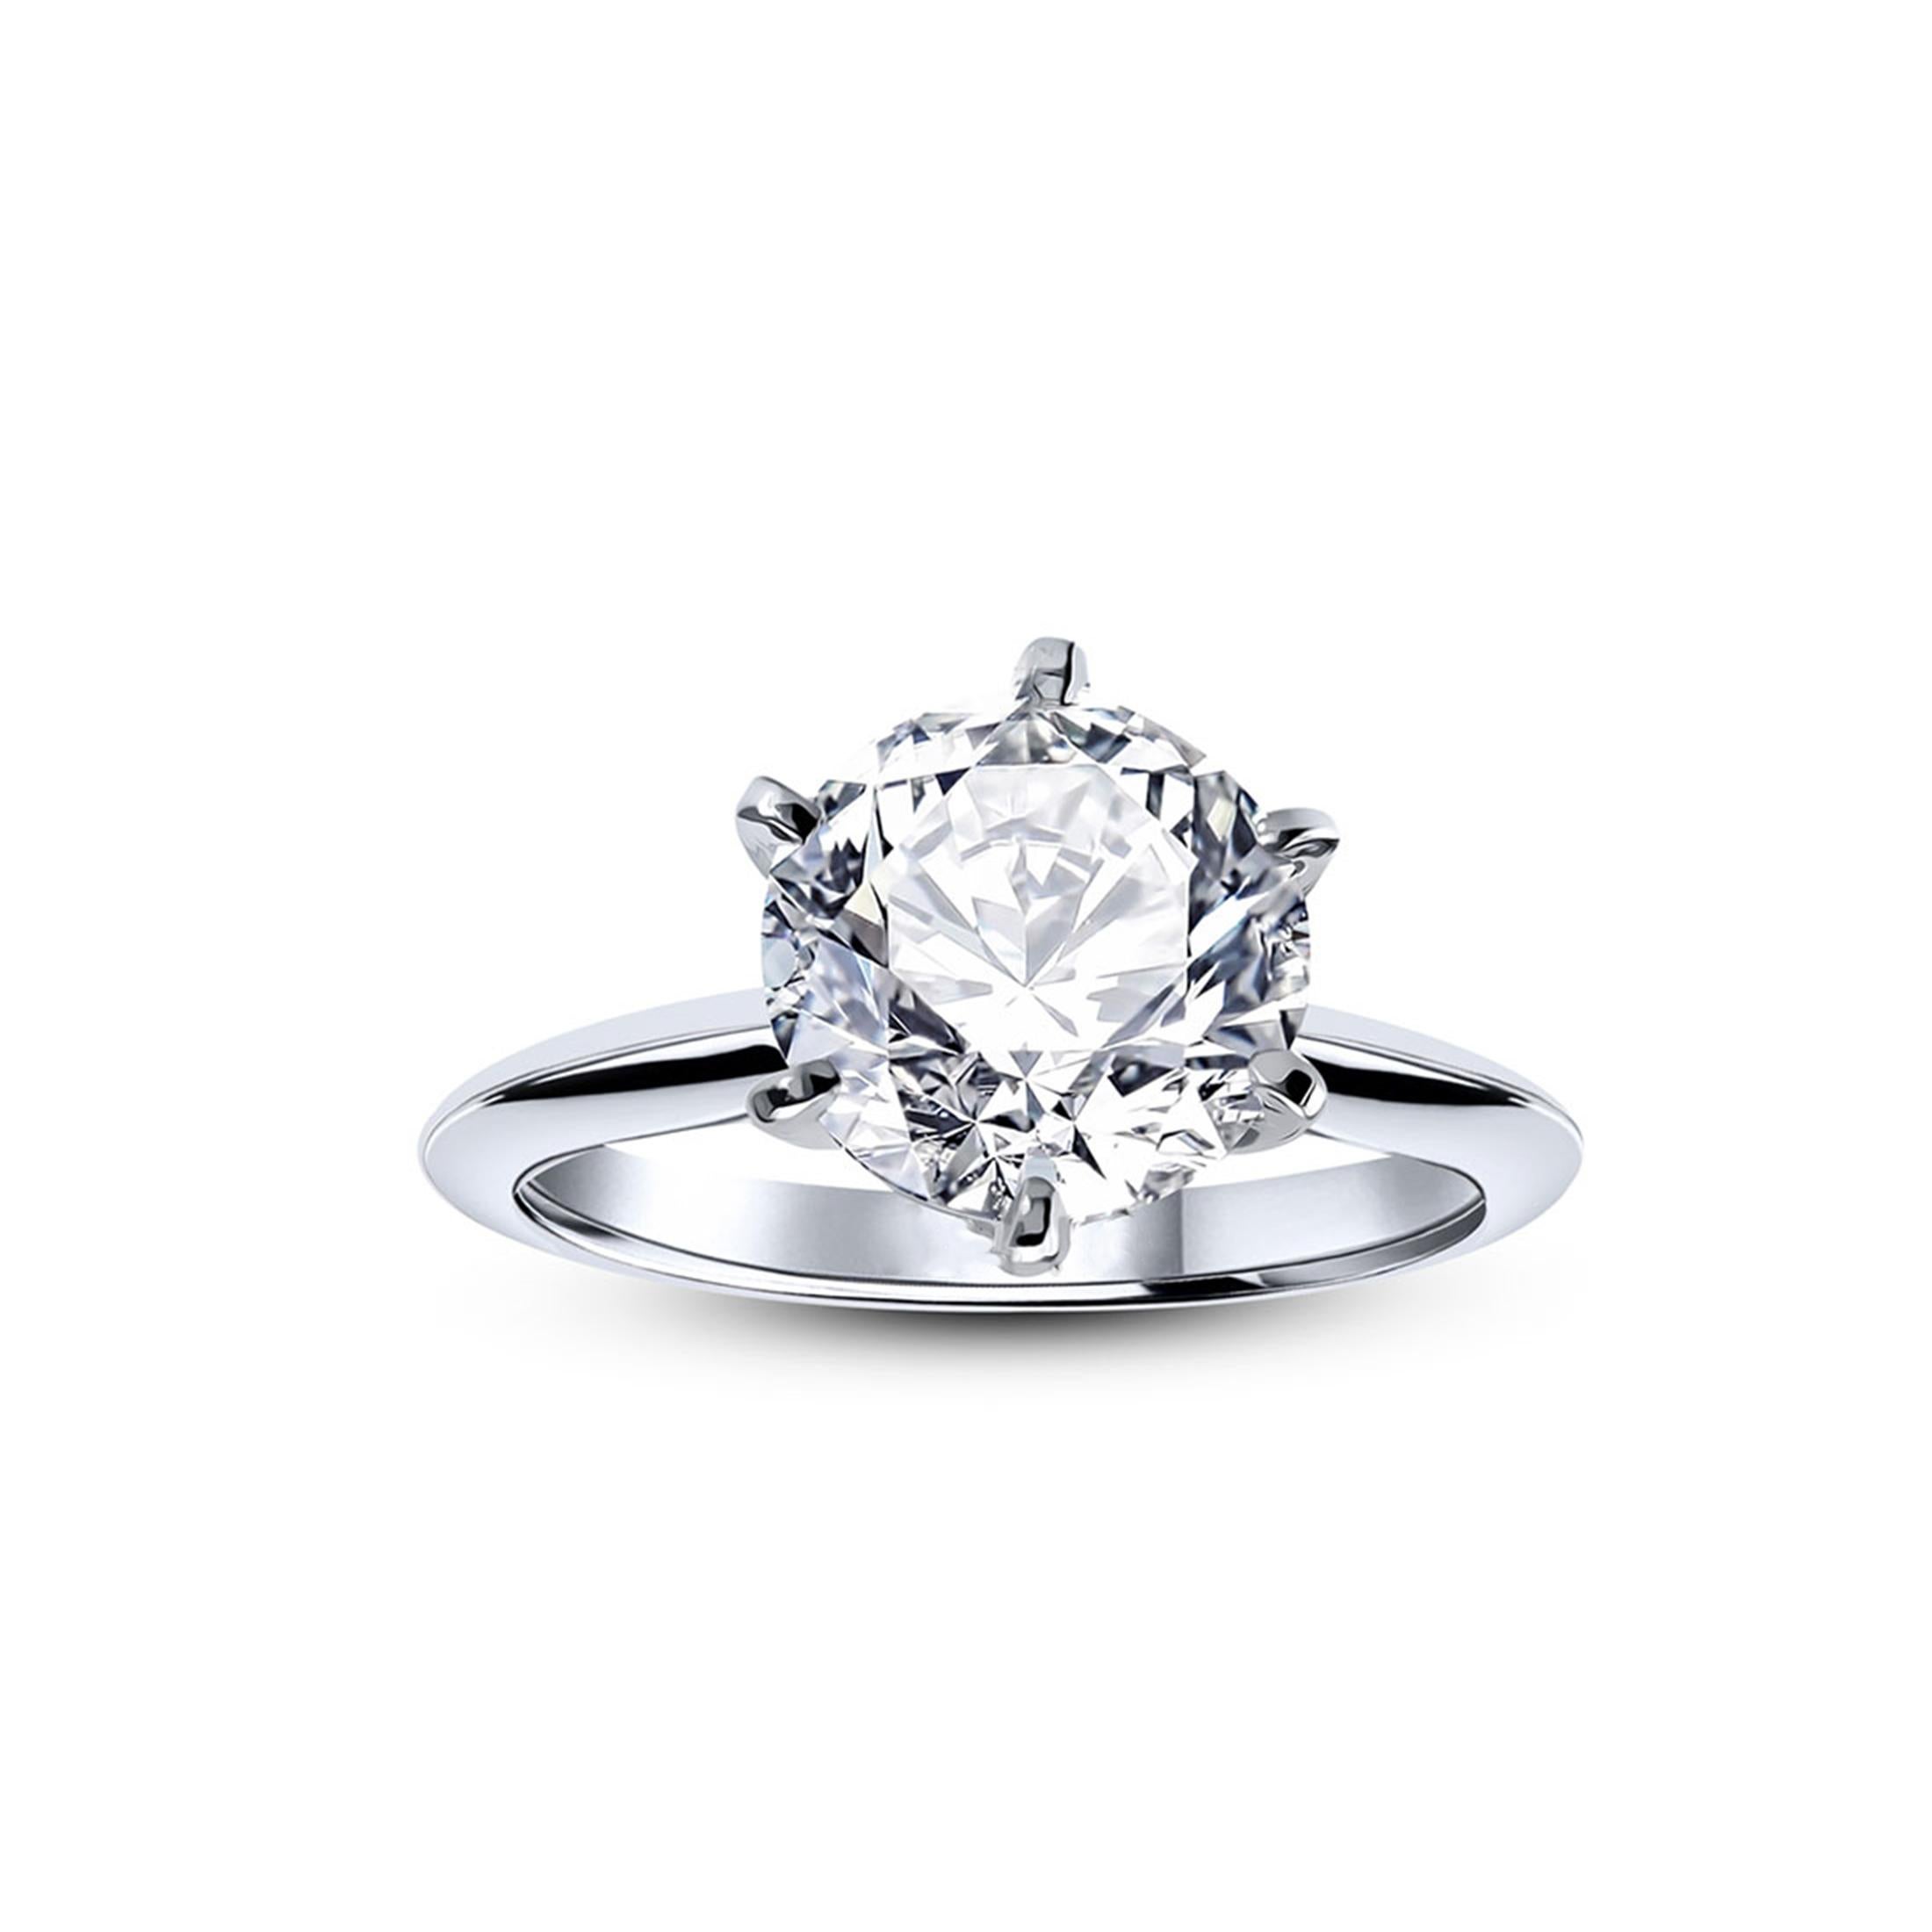 For Sale:  3 Carat Diamond Engagement Ring in 18K White Gold, Certified G Color 4